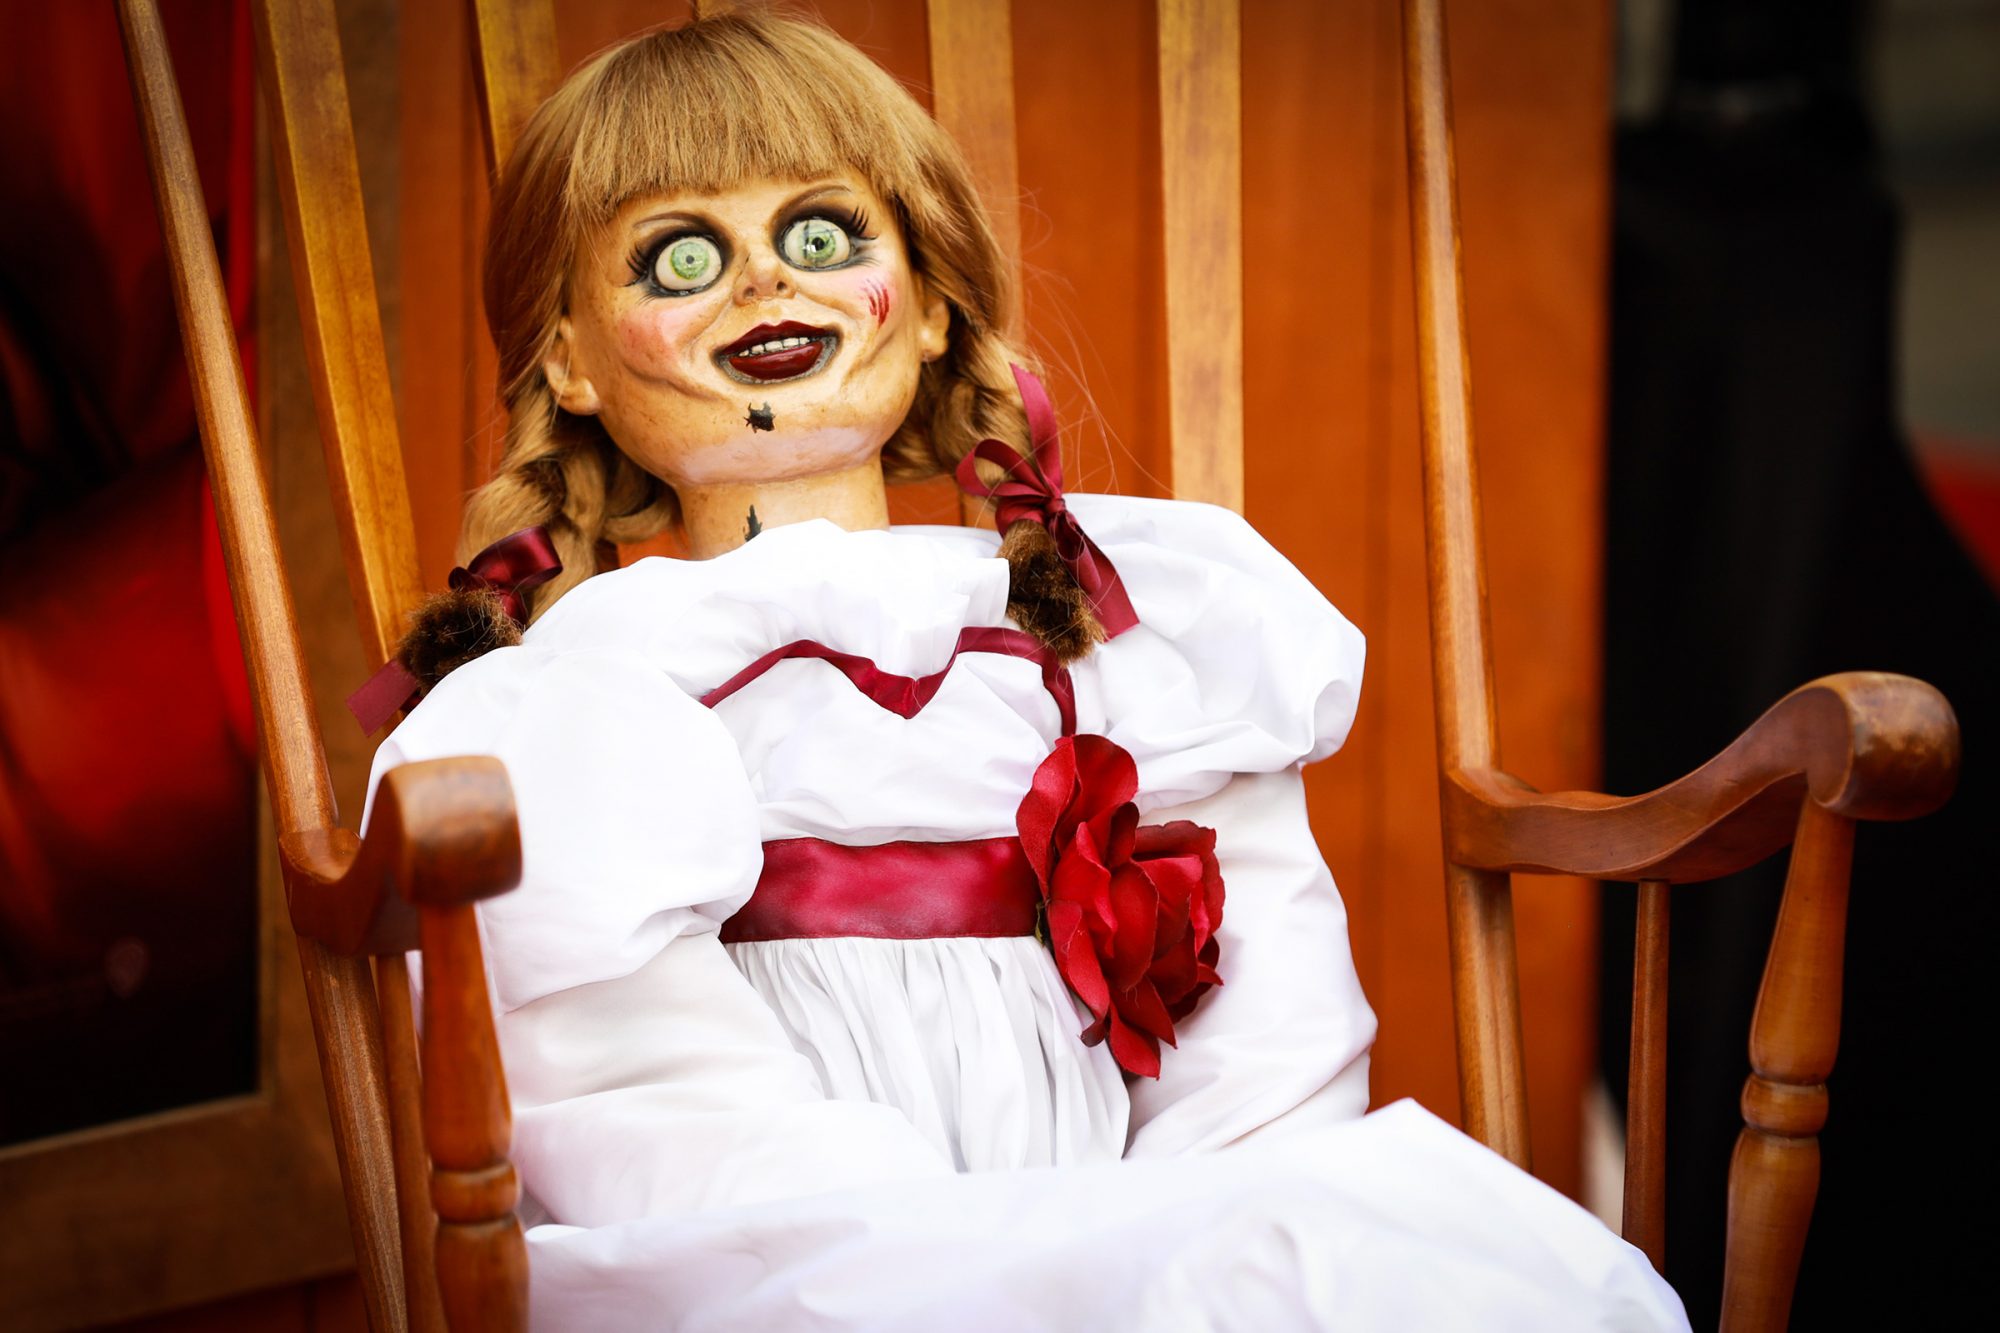 Who is scarier: The real Annabelle doll – or the movie one? – Film Daily